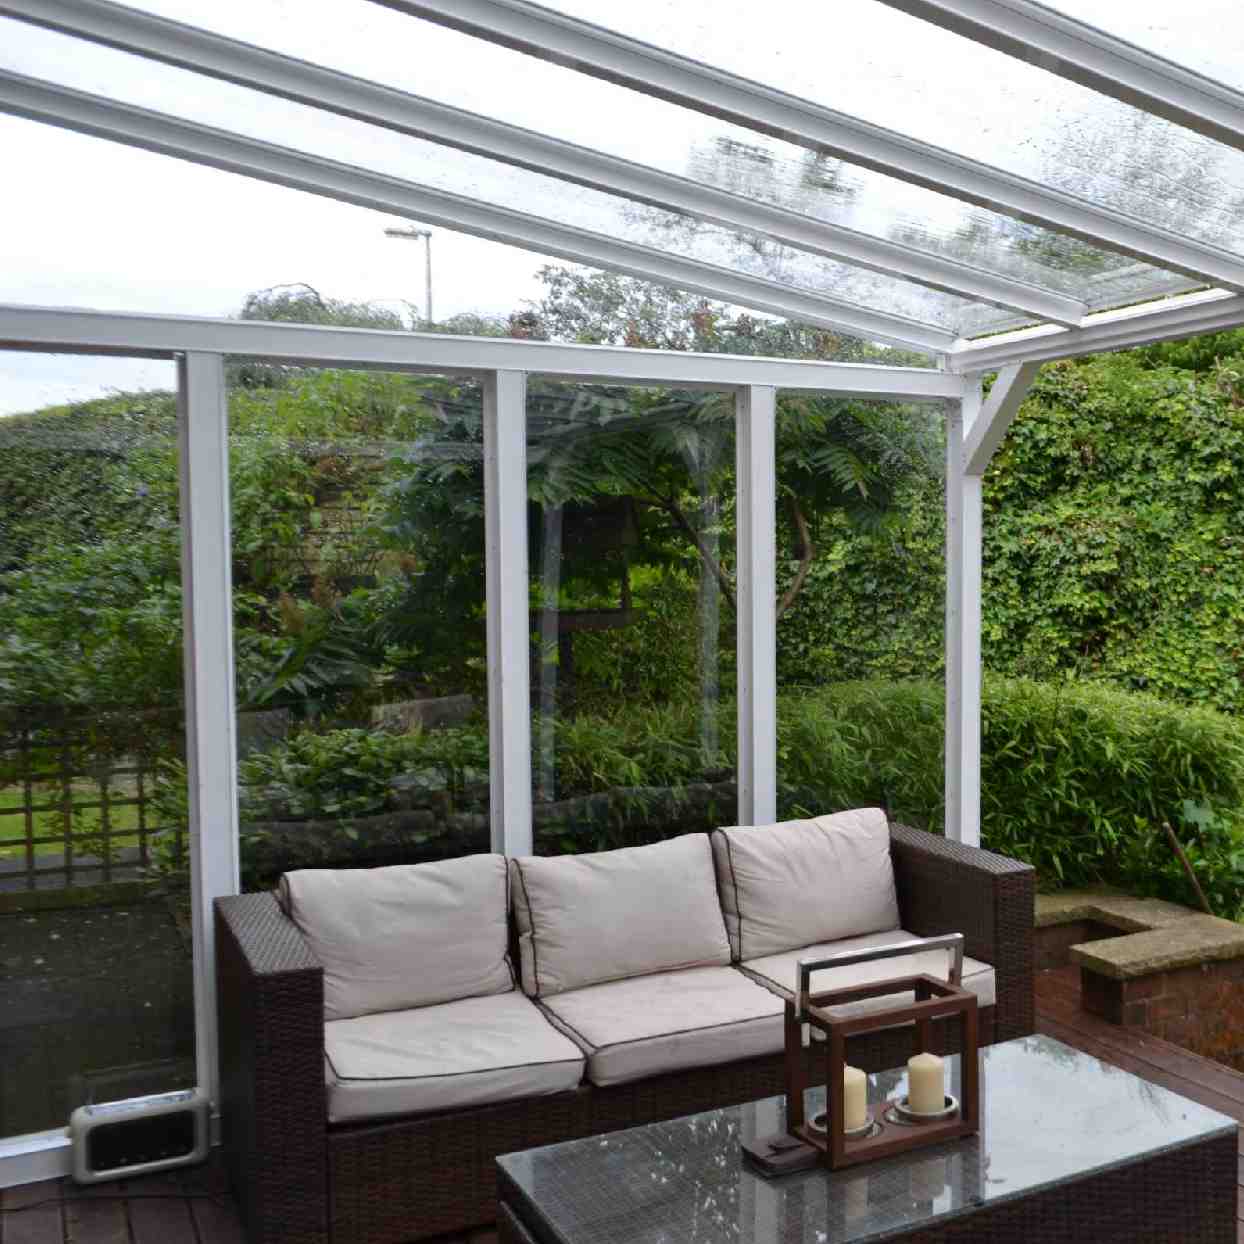 Buy Omega Verandah White with 6mm Glass Clear Plate Polycarbonate Glazing - 3.5m (W) x 2.5m (P), (3) Supporting Posts online today